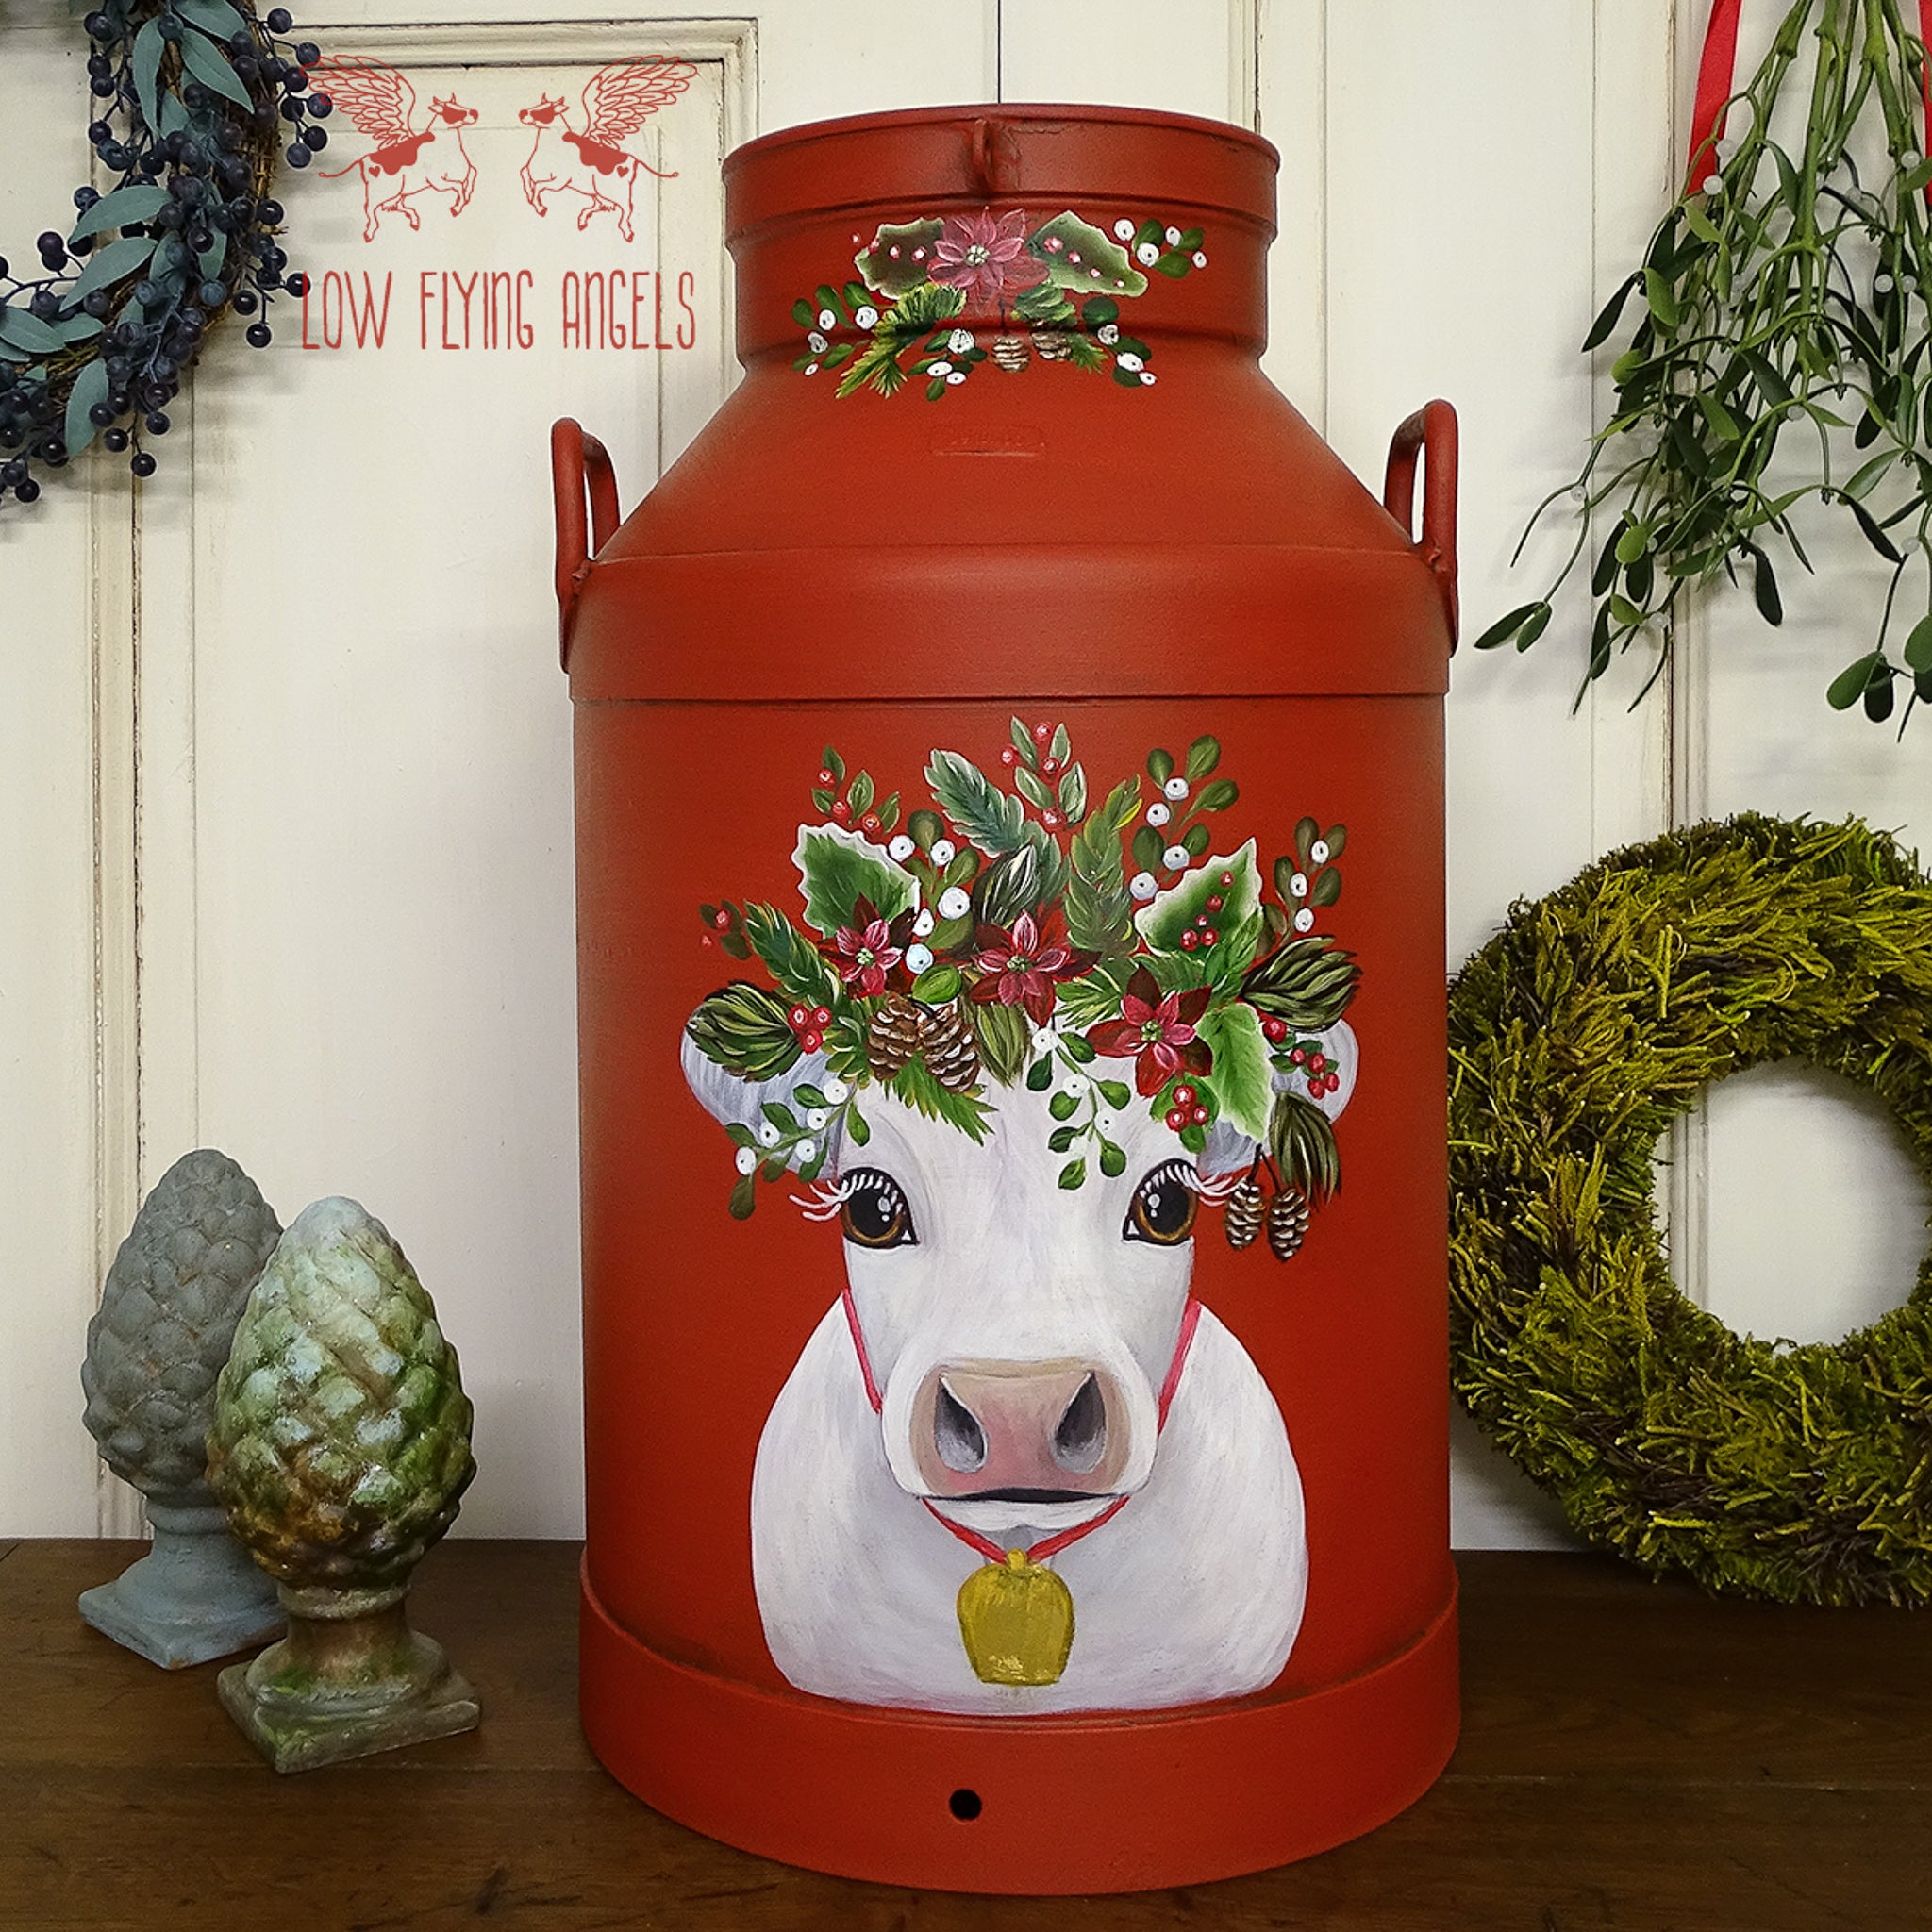 A vintage metal milk can refurbished by Low Flying Angels is painted with Dixie Belle's Barn Red chalk mineral paint and features a painting of a white cow wearing a Christmas wreath on its head.